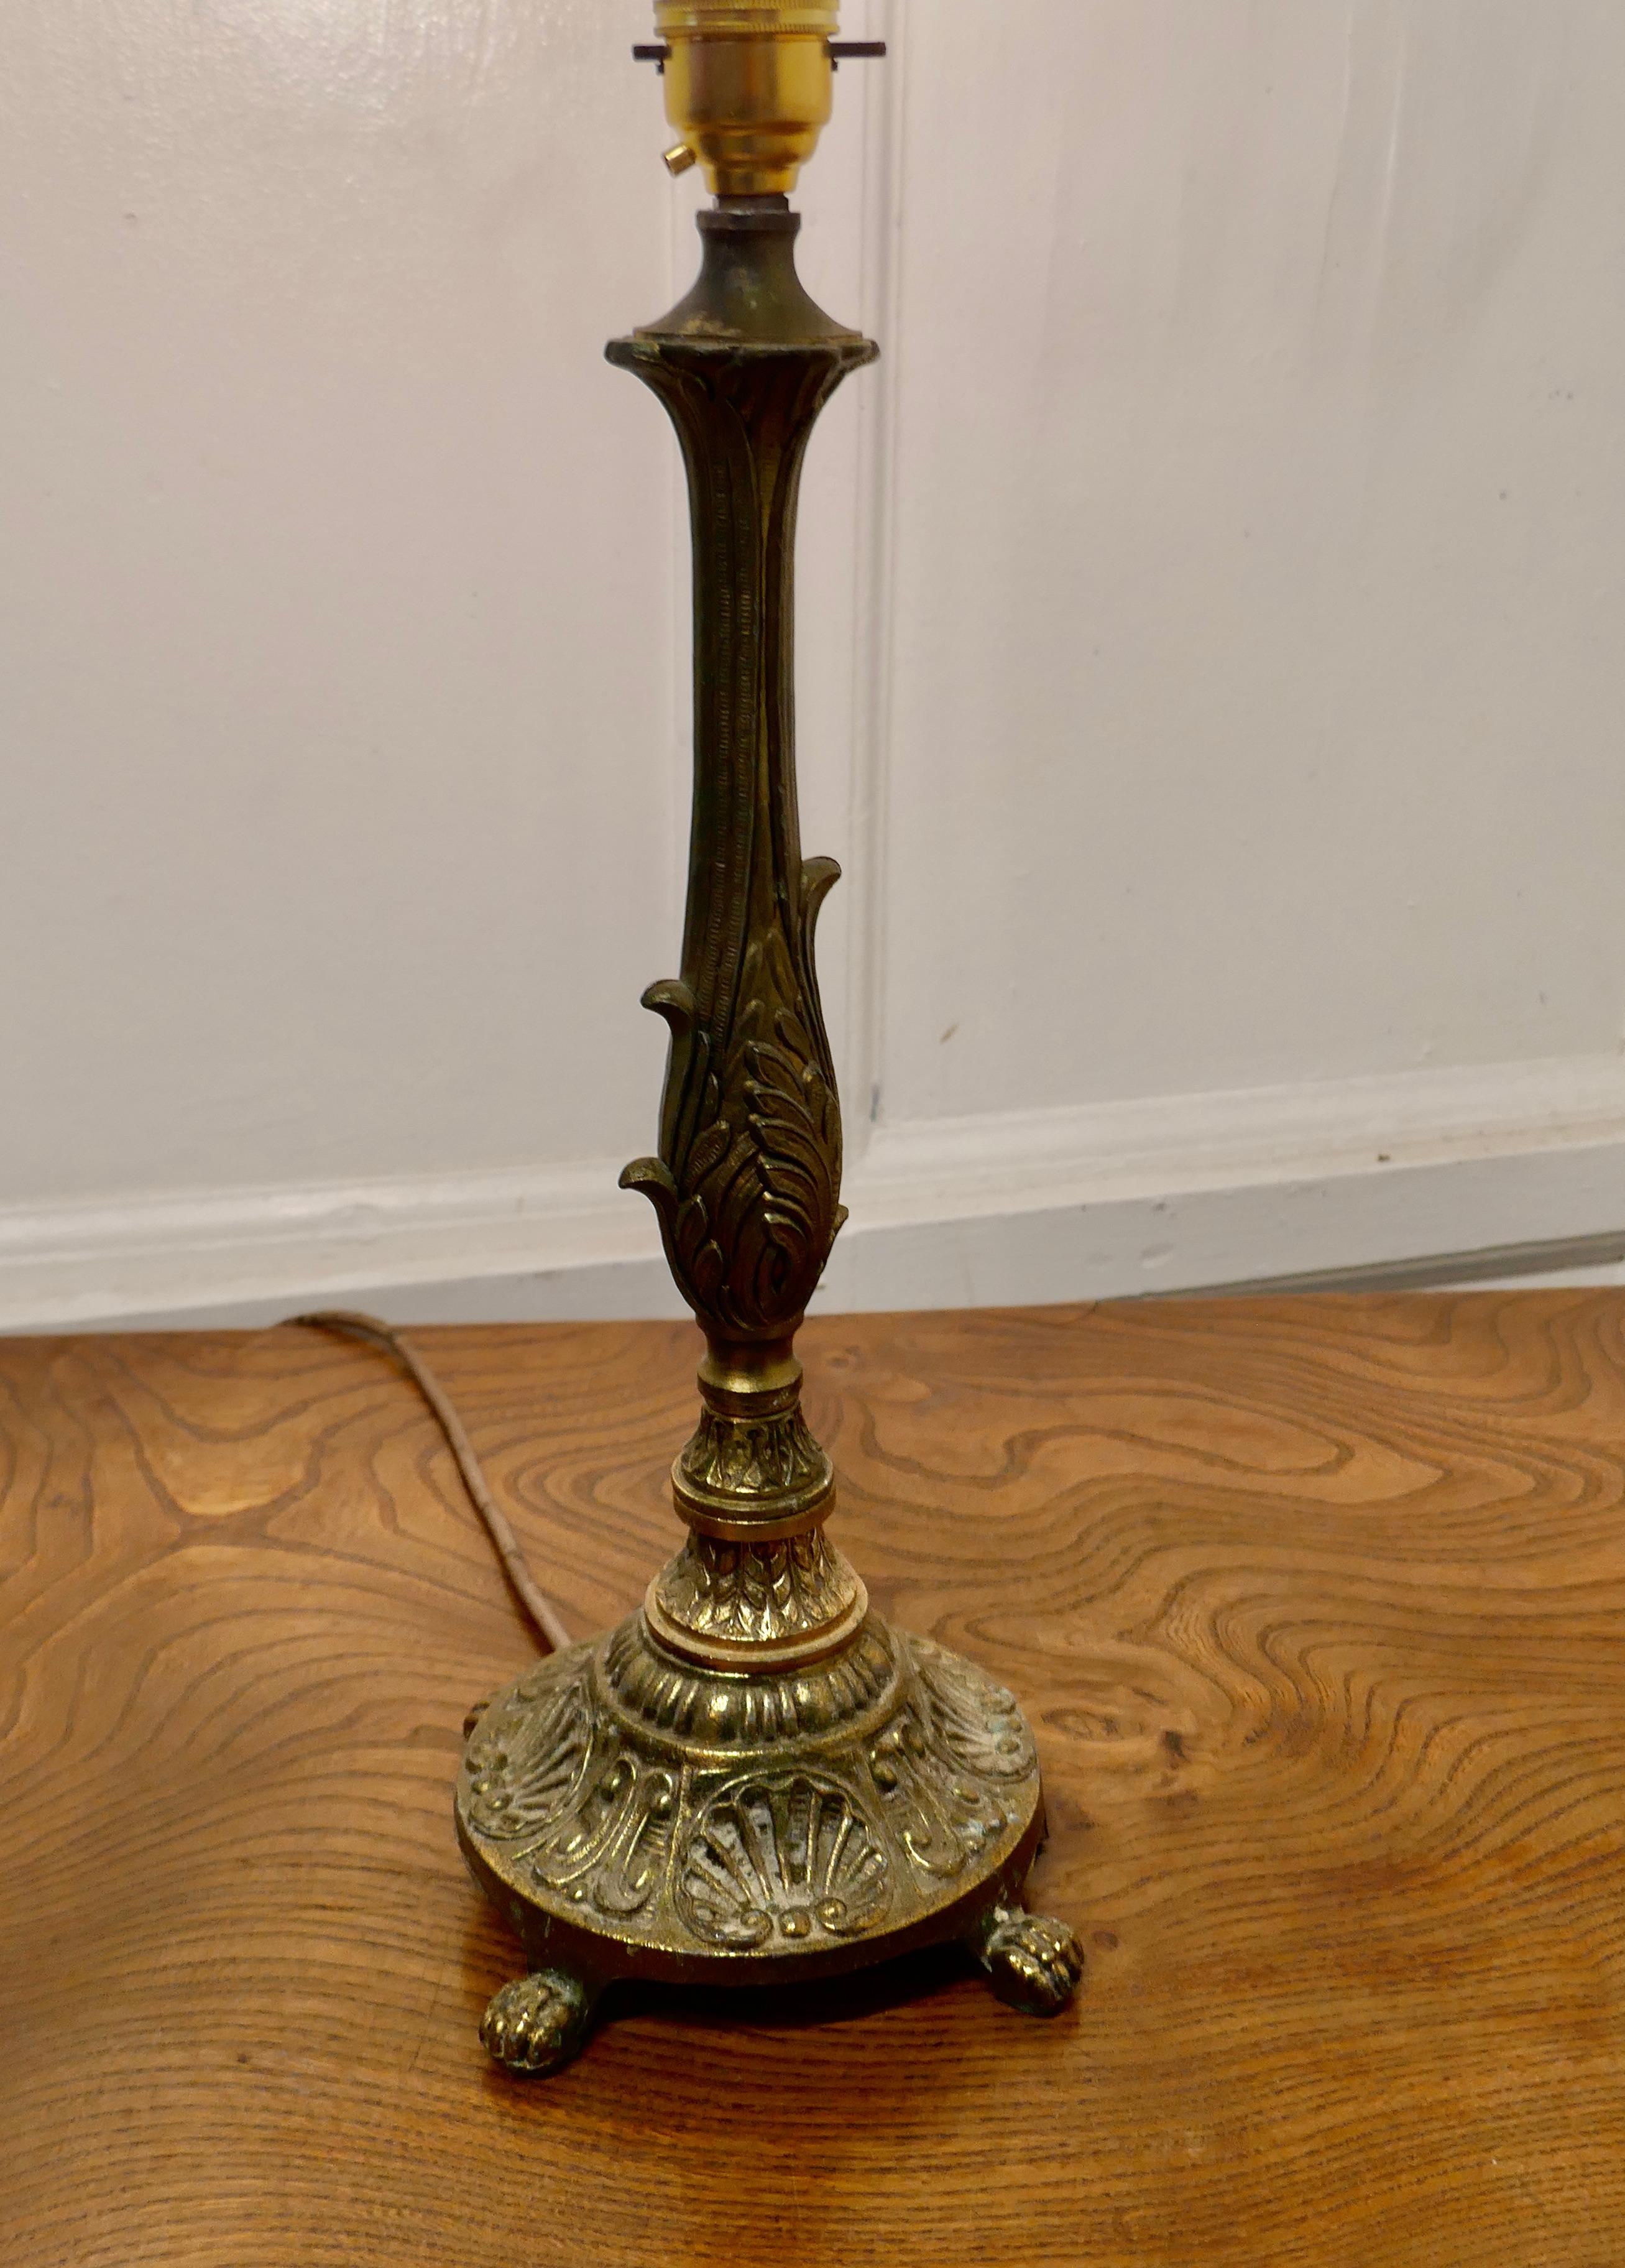 Decorative chased brass table lamp

This is good heavy brass piece, the lamp has a decorative central column set on a round base with with clawfeet 
This is an attractive piece with a good patina.
The lamp is 17” tall (to the bayonet) and stands